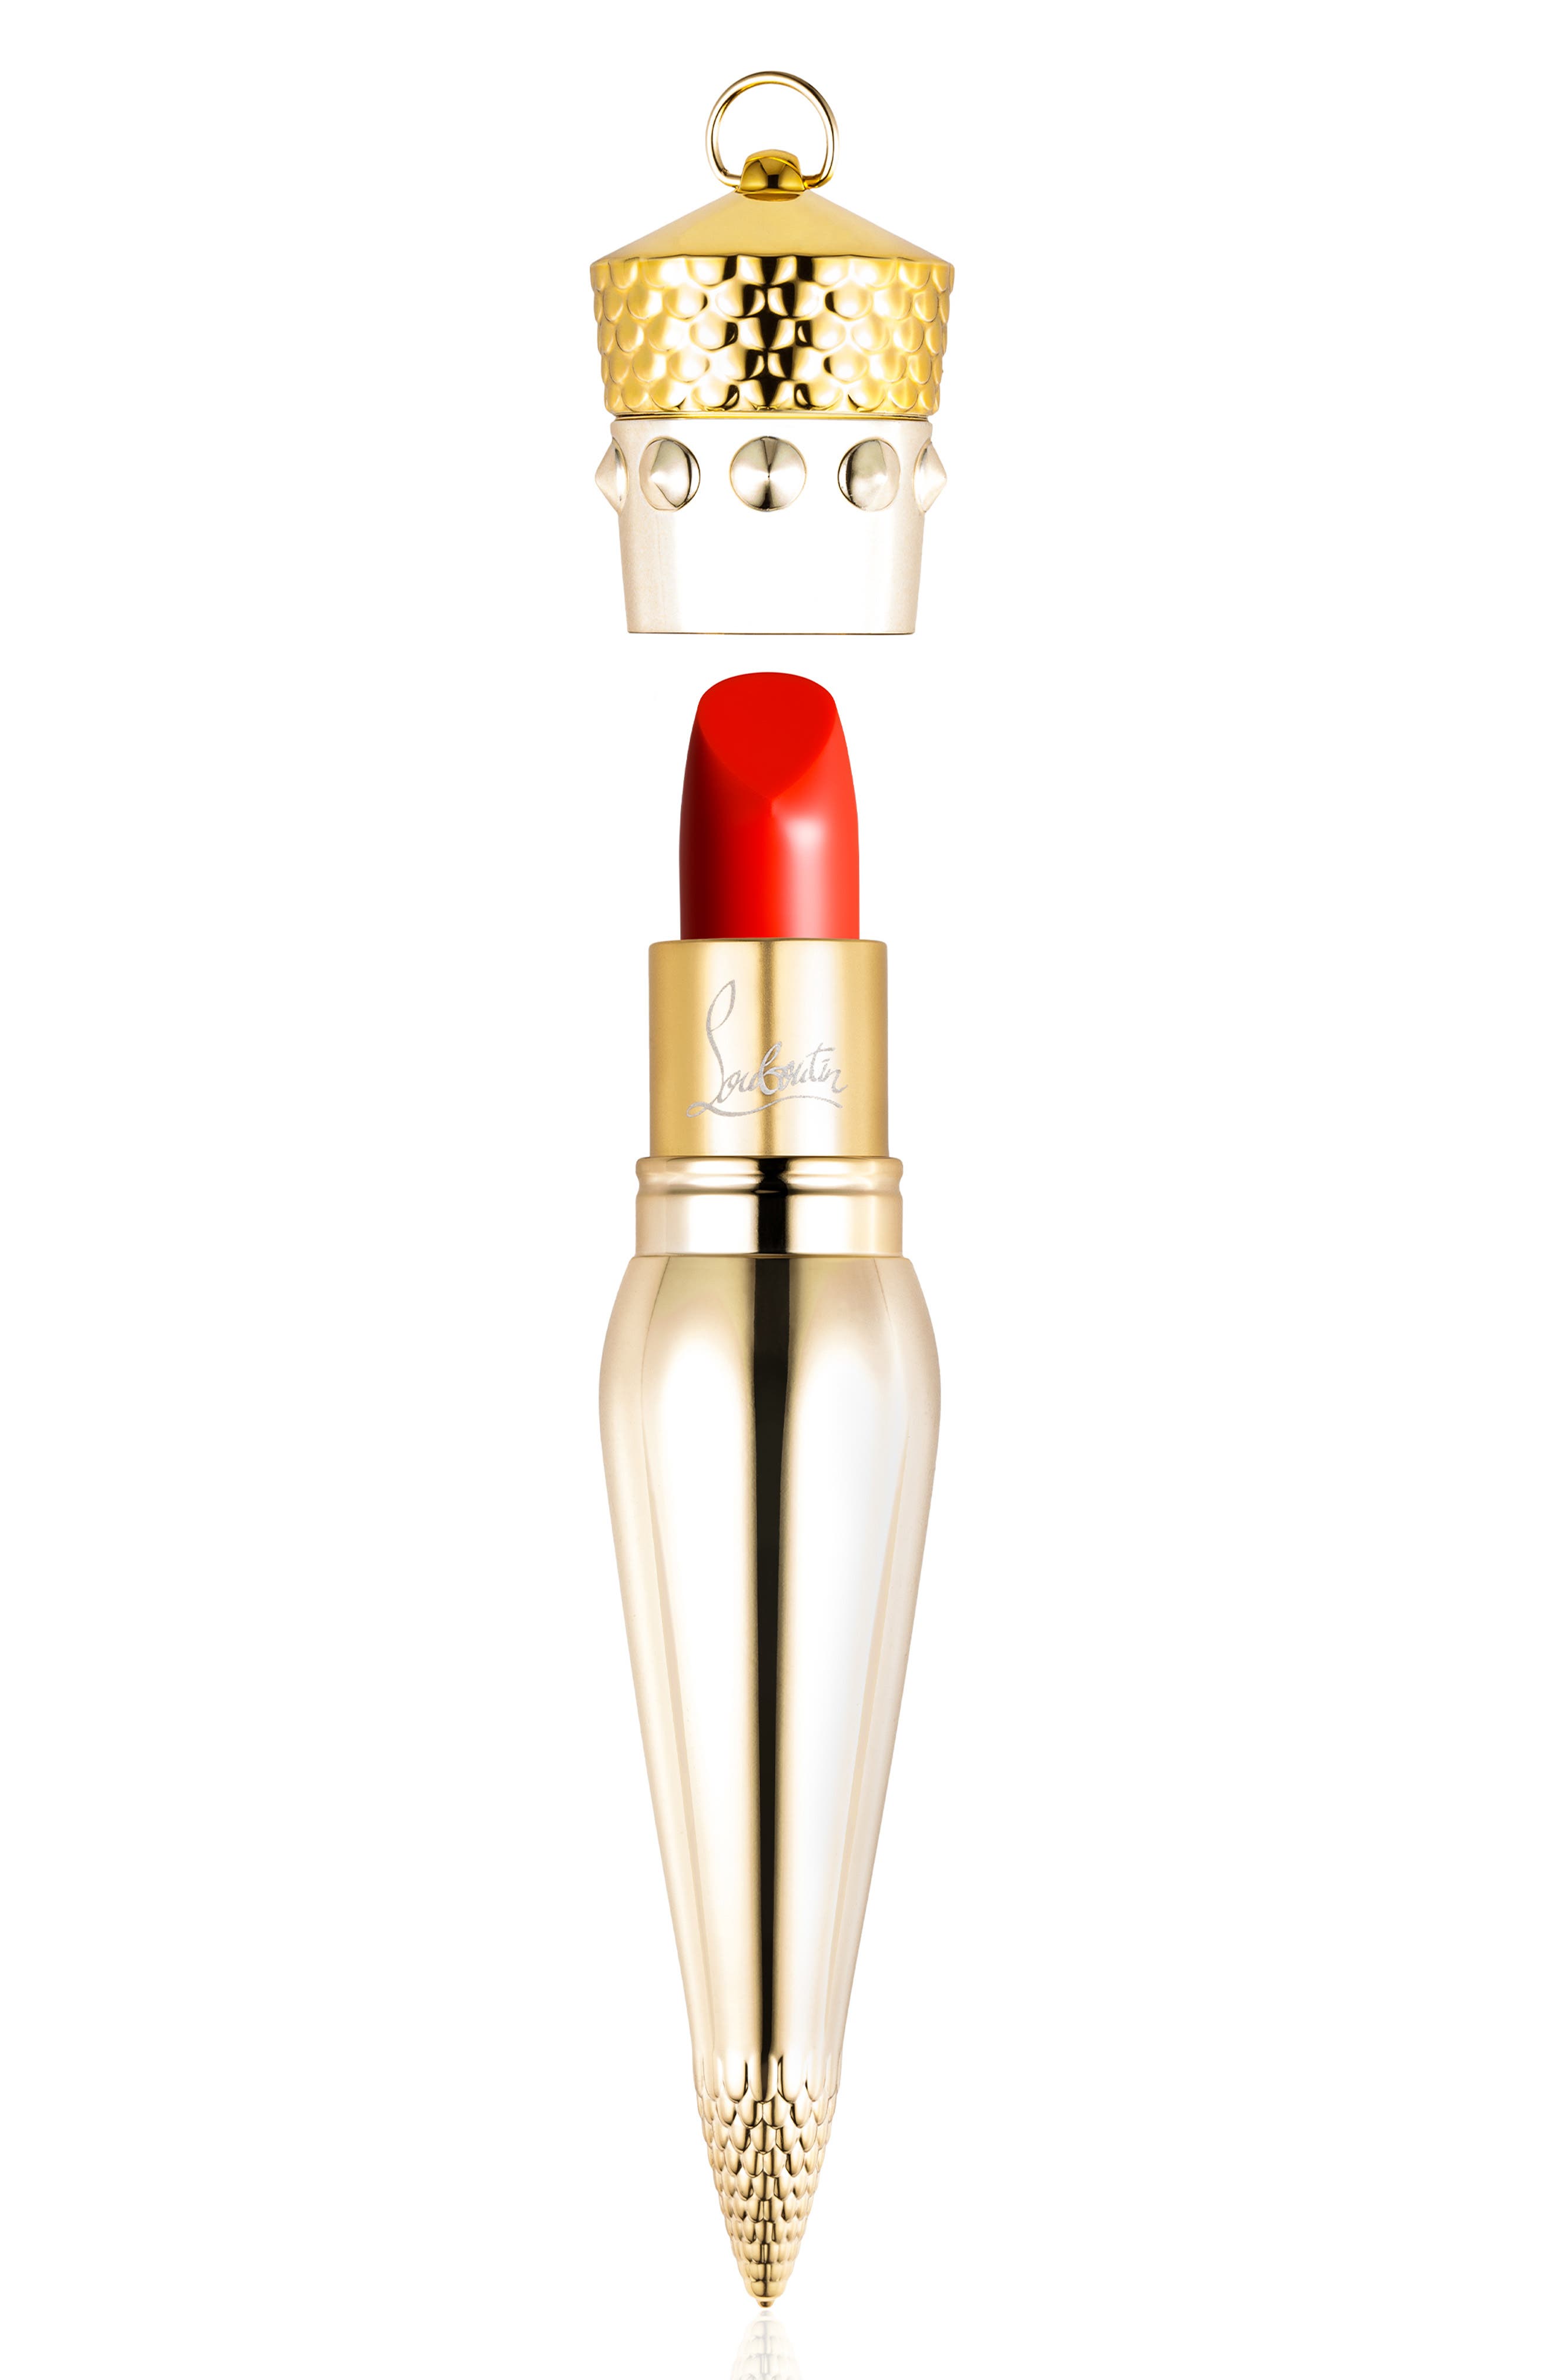 Christian Louboutin Silky Satin Lip Colour in Youpiyou 510 at Nordstrom